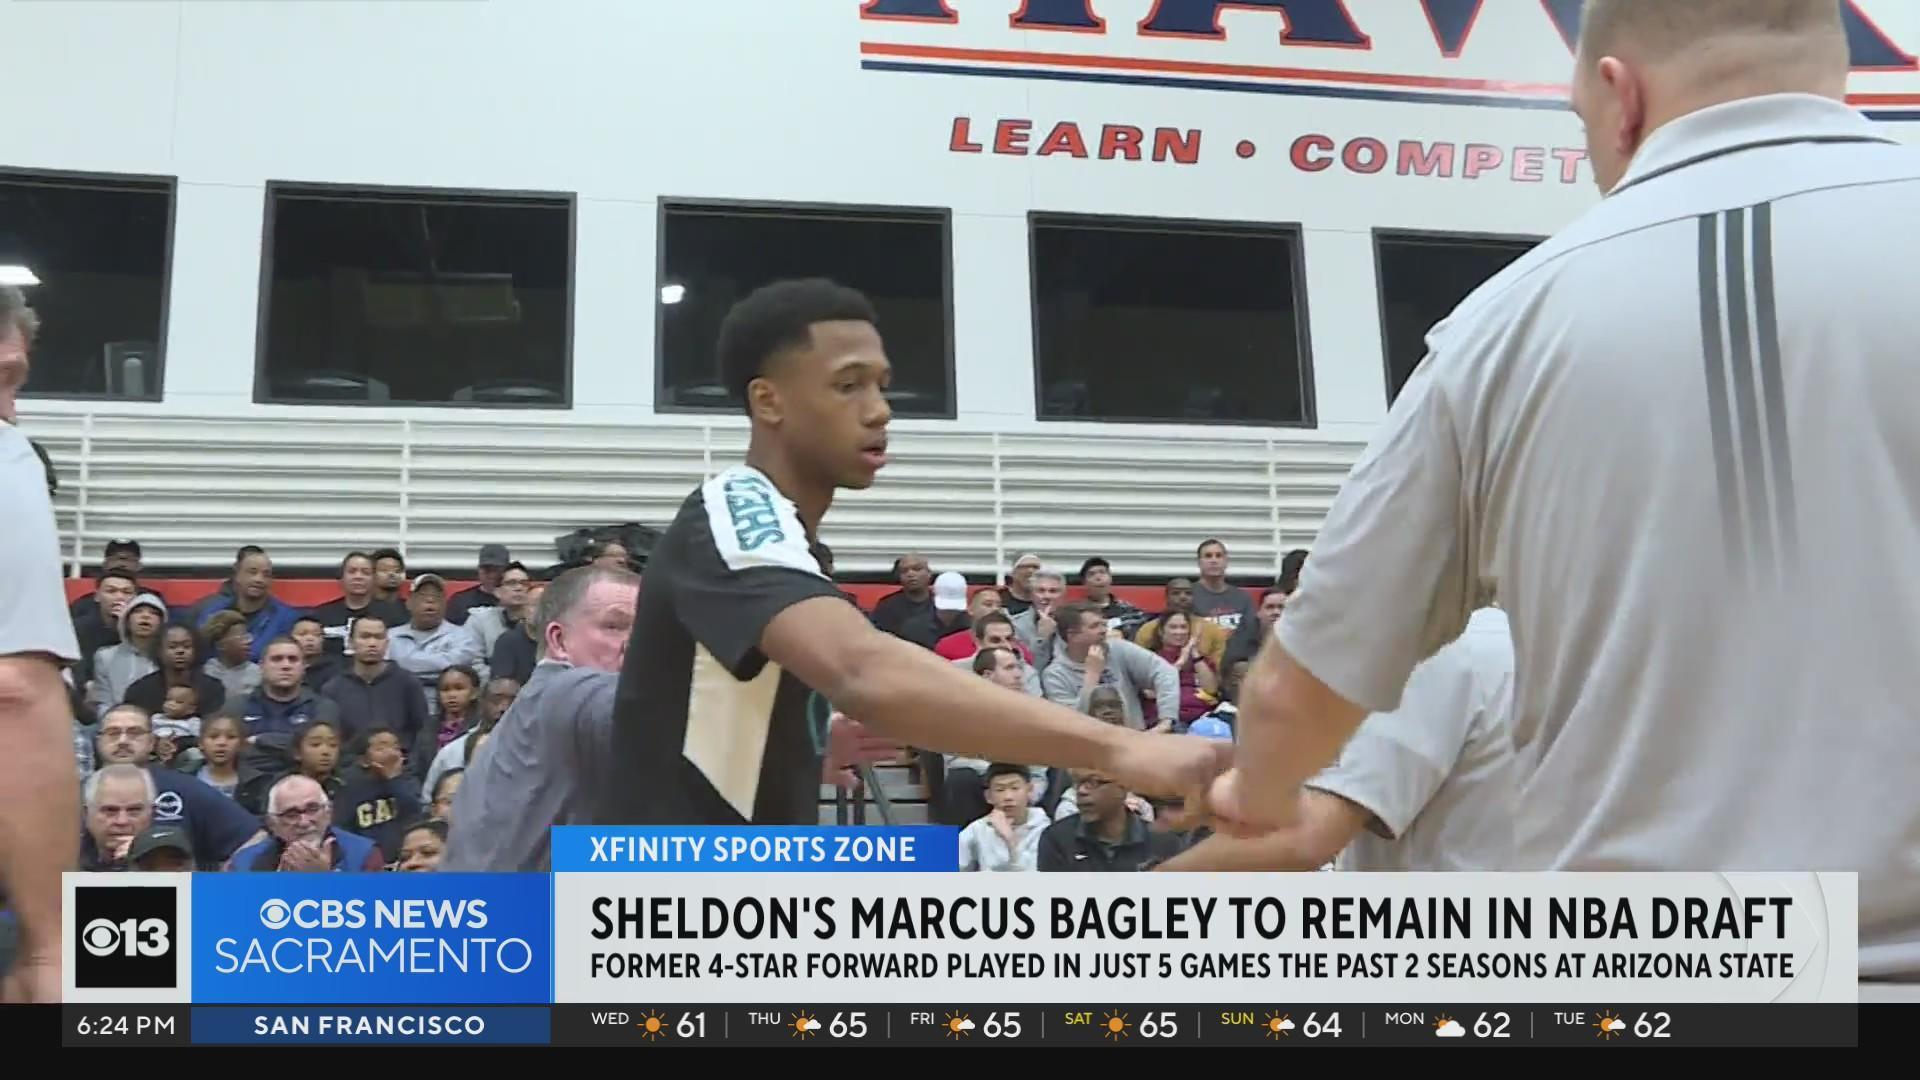 Marcus Bagley, Sacramento Kings rookie's brother, now at Sheldon